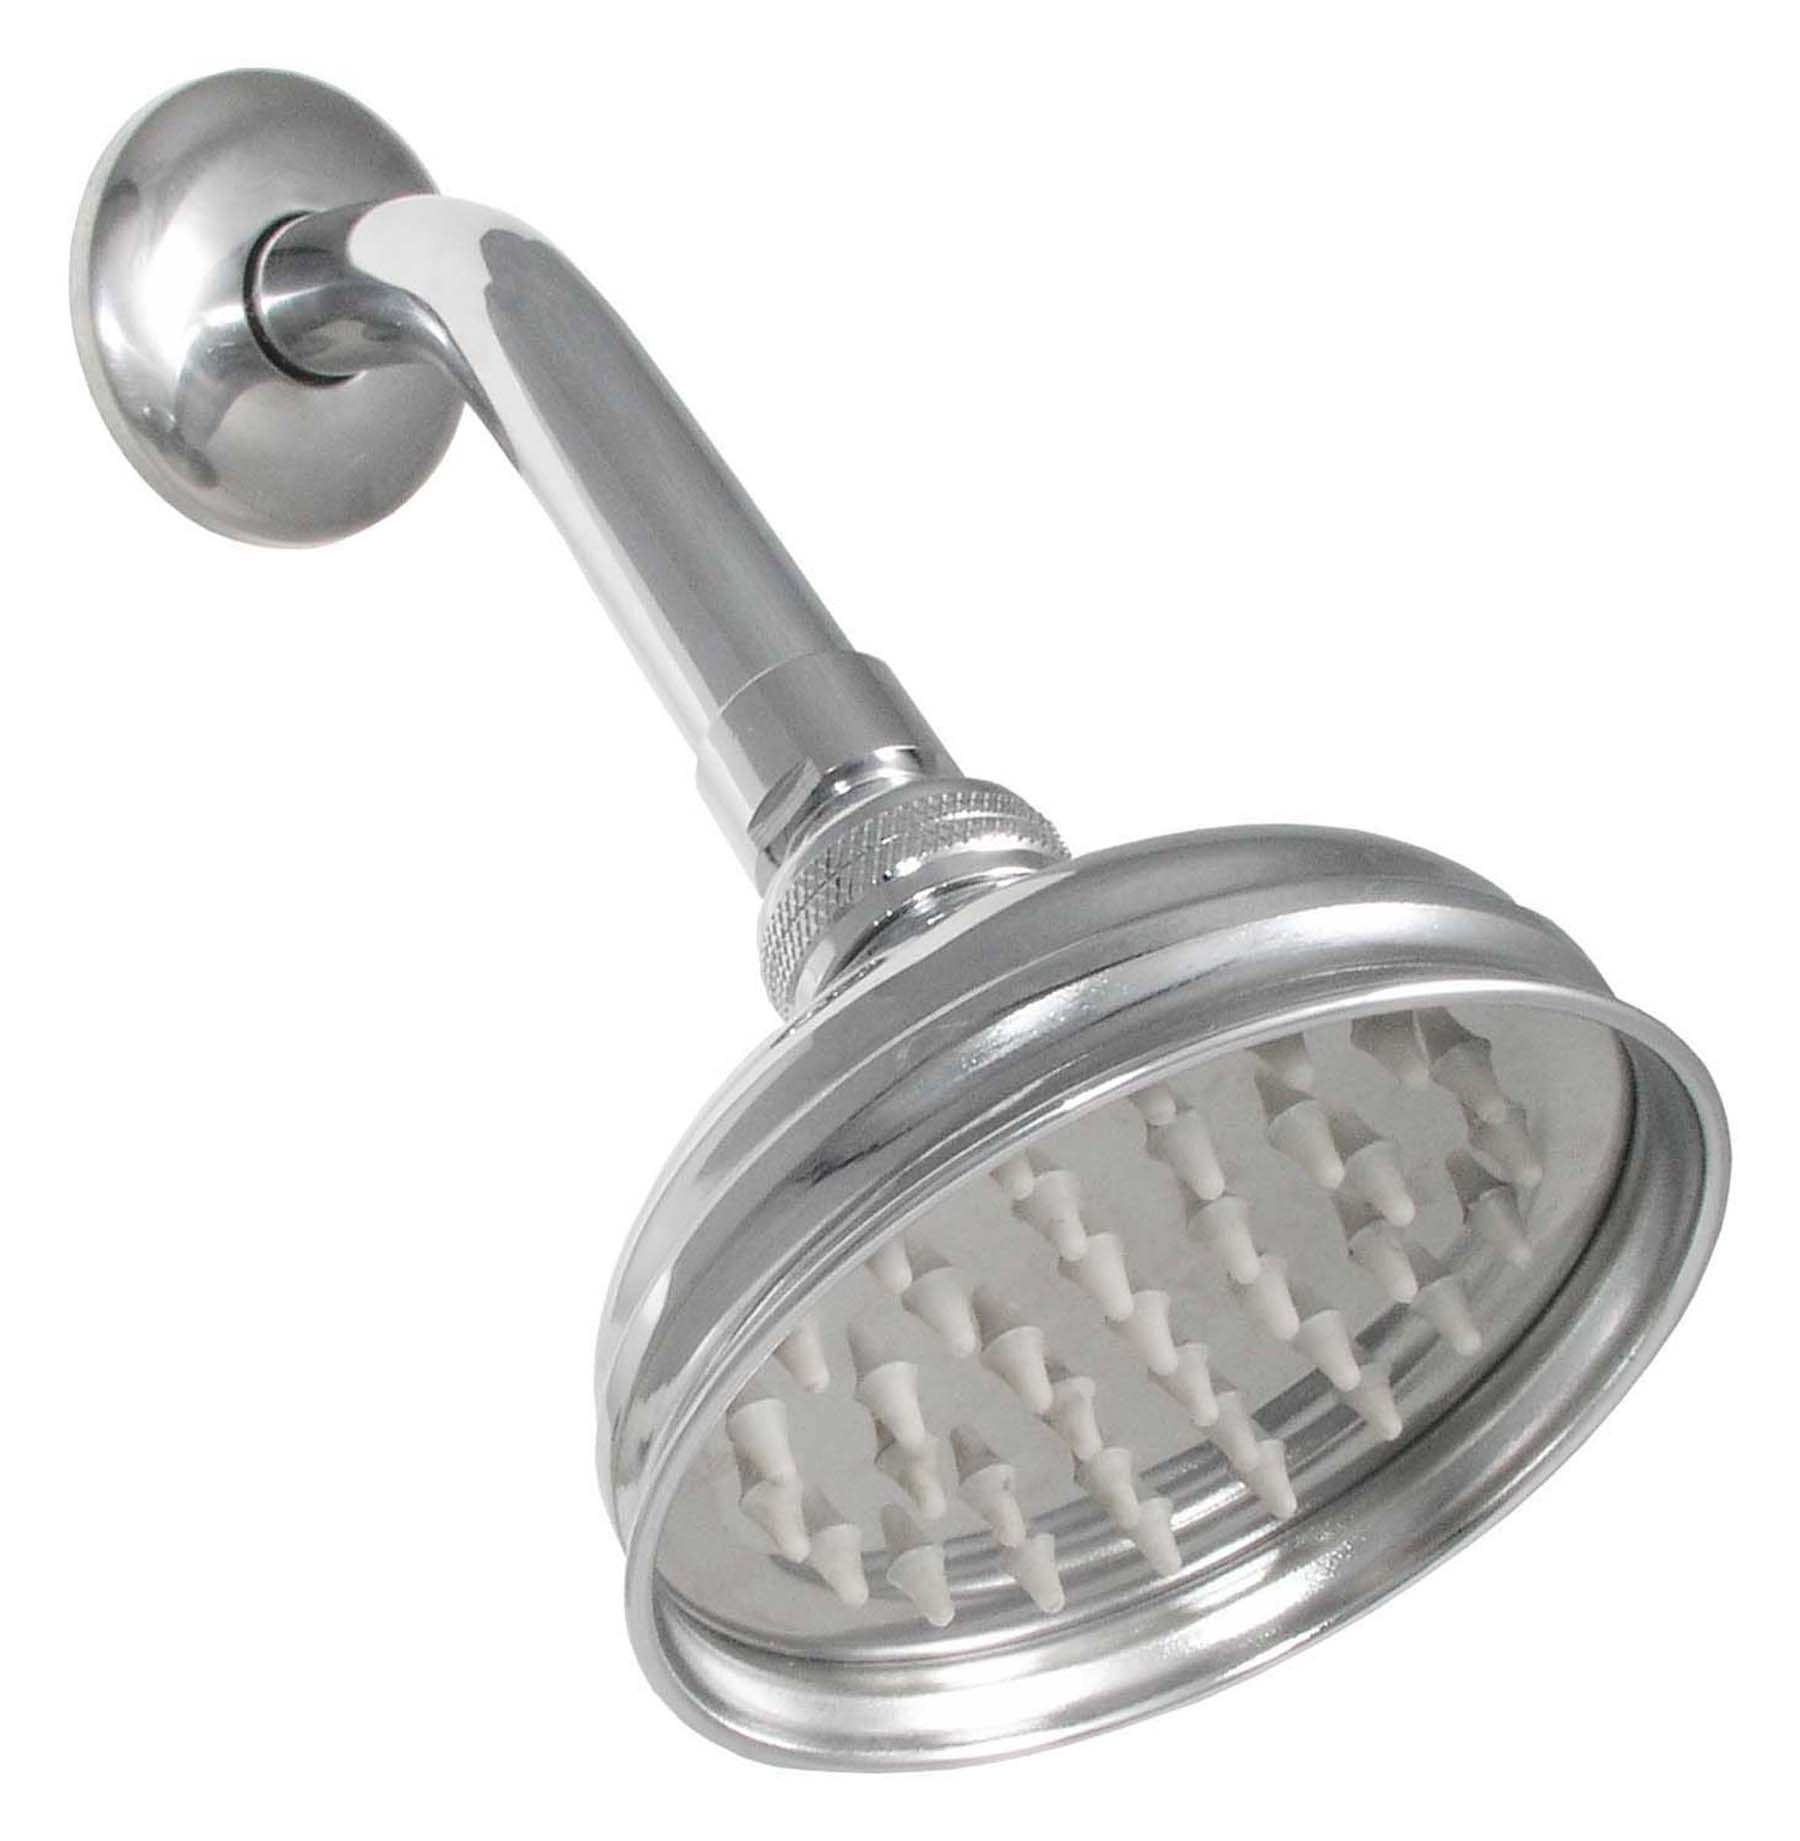 LDR 520 1045CP Nature Mist One Function Solid Brass Shower Head